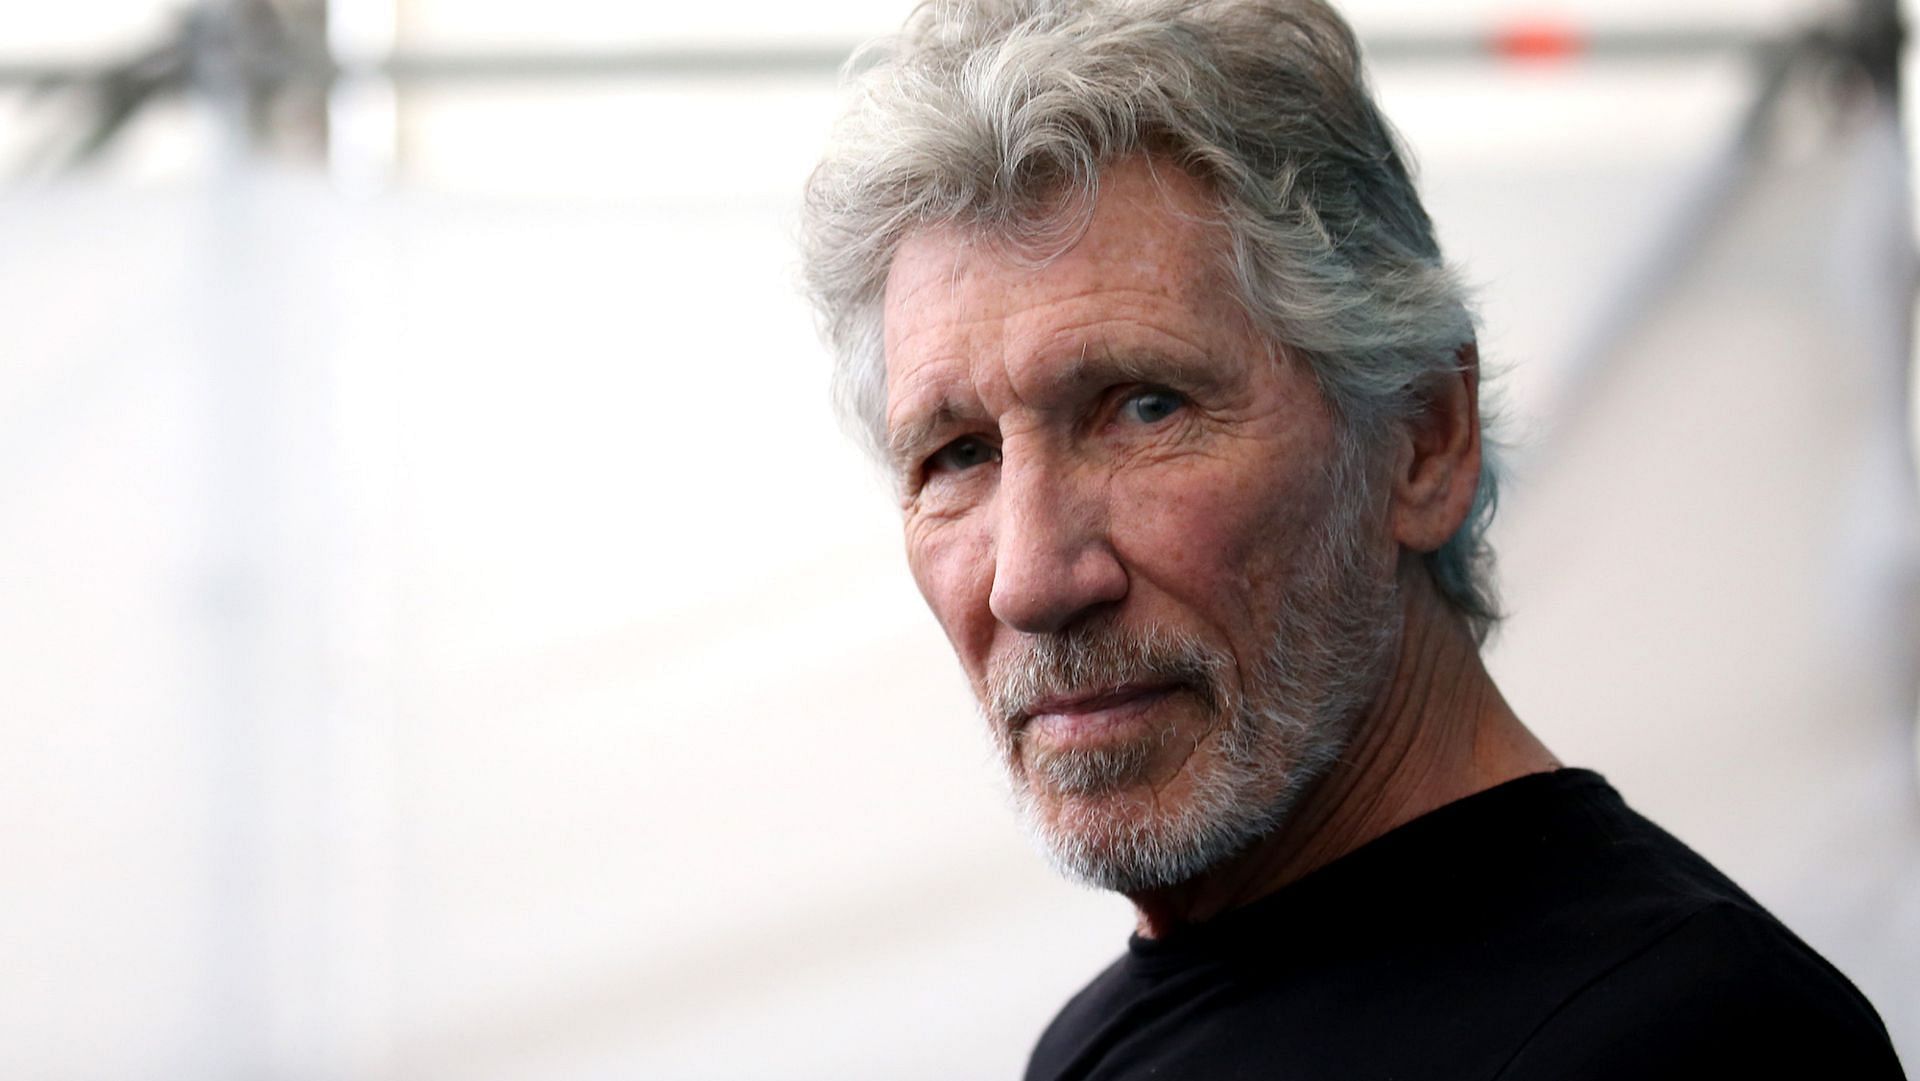 Roger Waters has sparked online debate after his recent CNN interview. (Image via Franco Origlia/Getty)